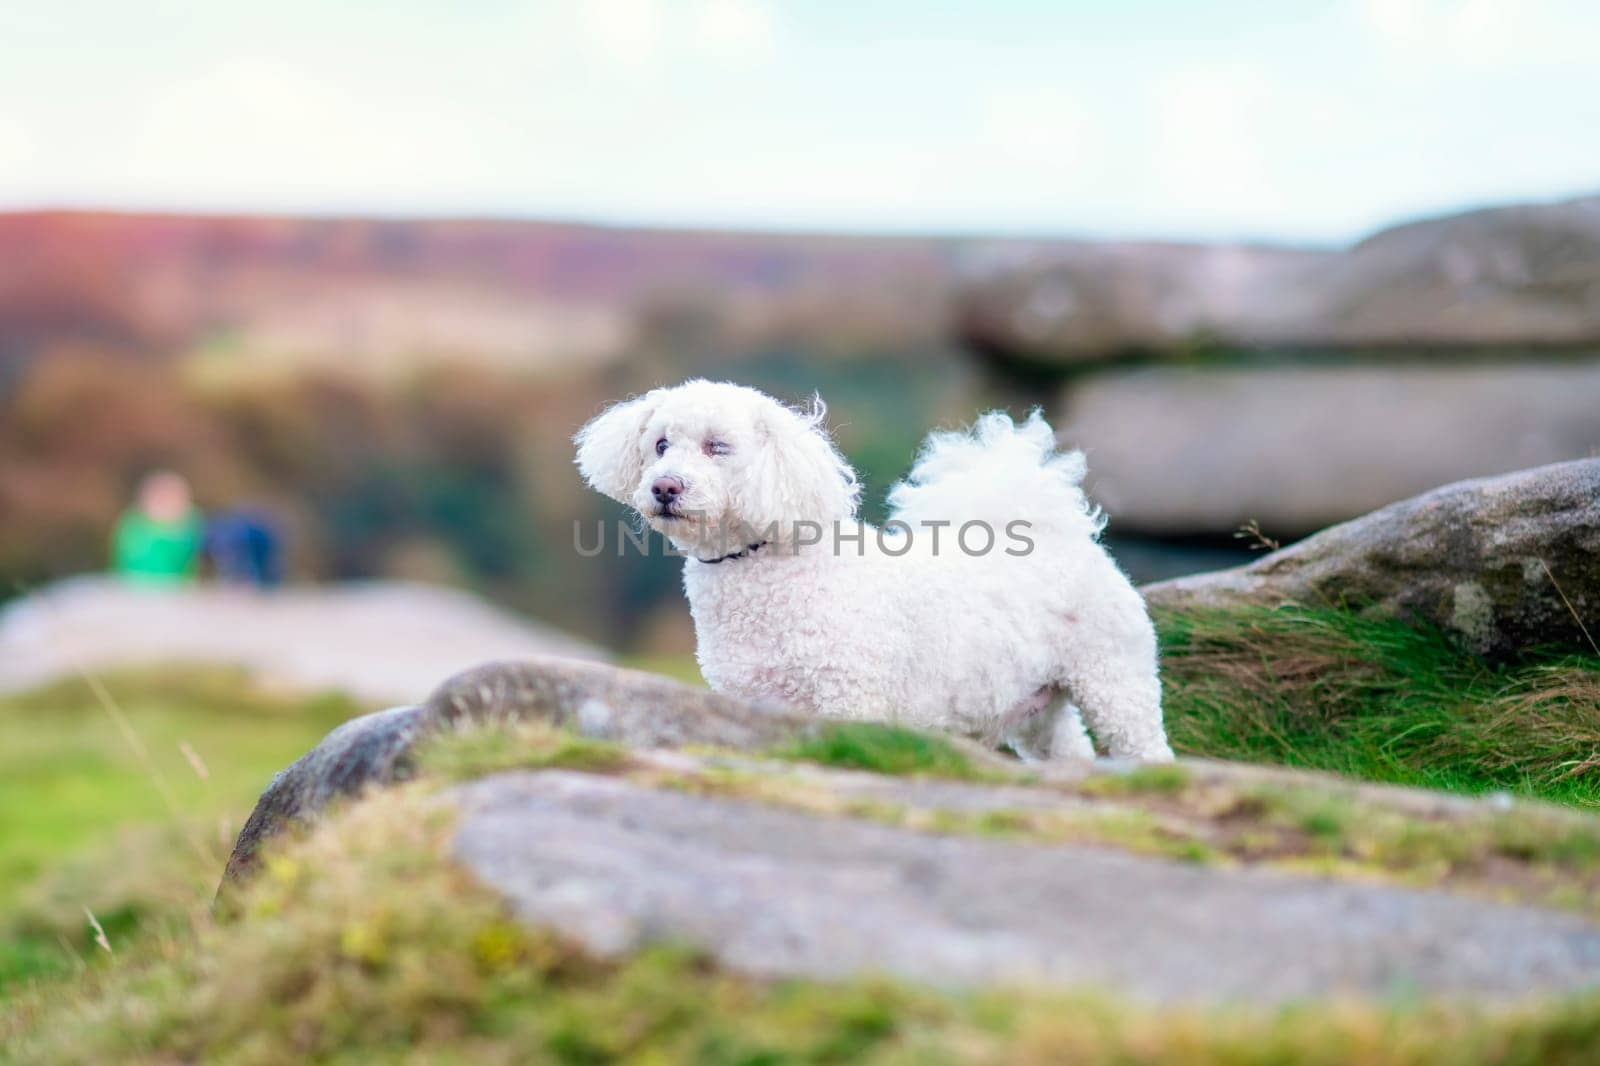 The cute white curly sitting dog  bichon on the pathway while walking on warm day